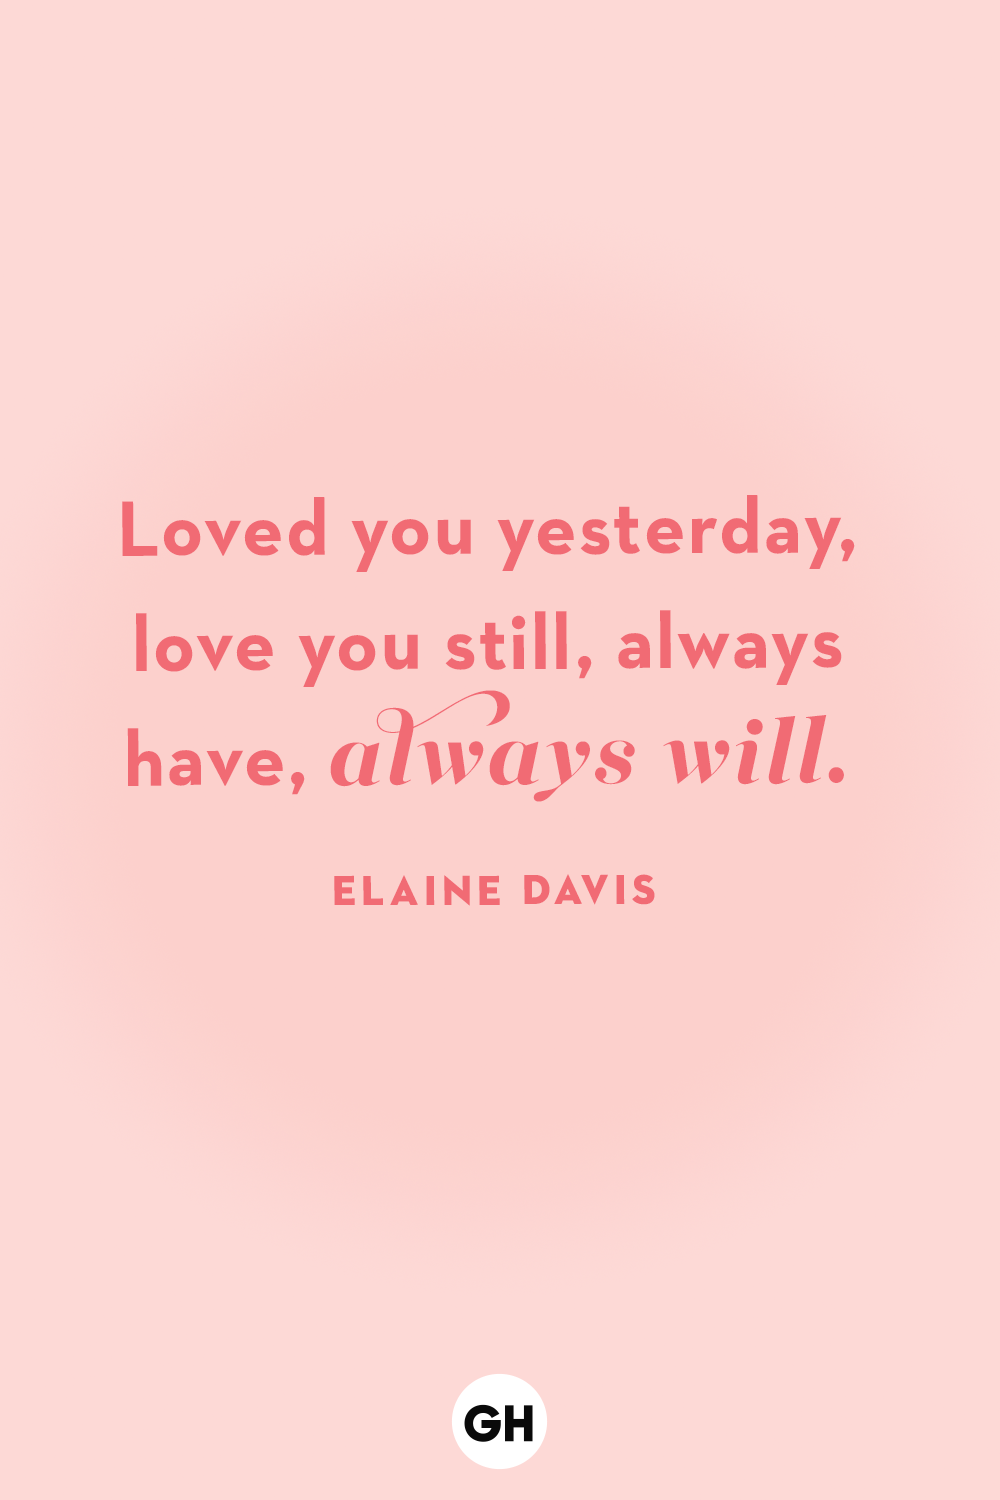 love you quotes and sayings for him